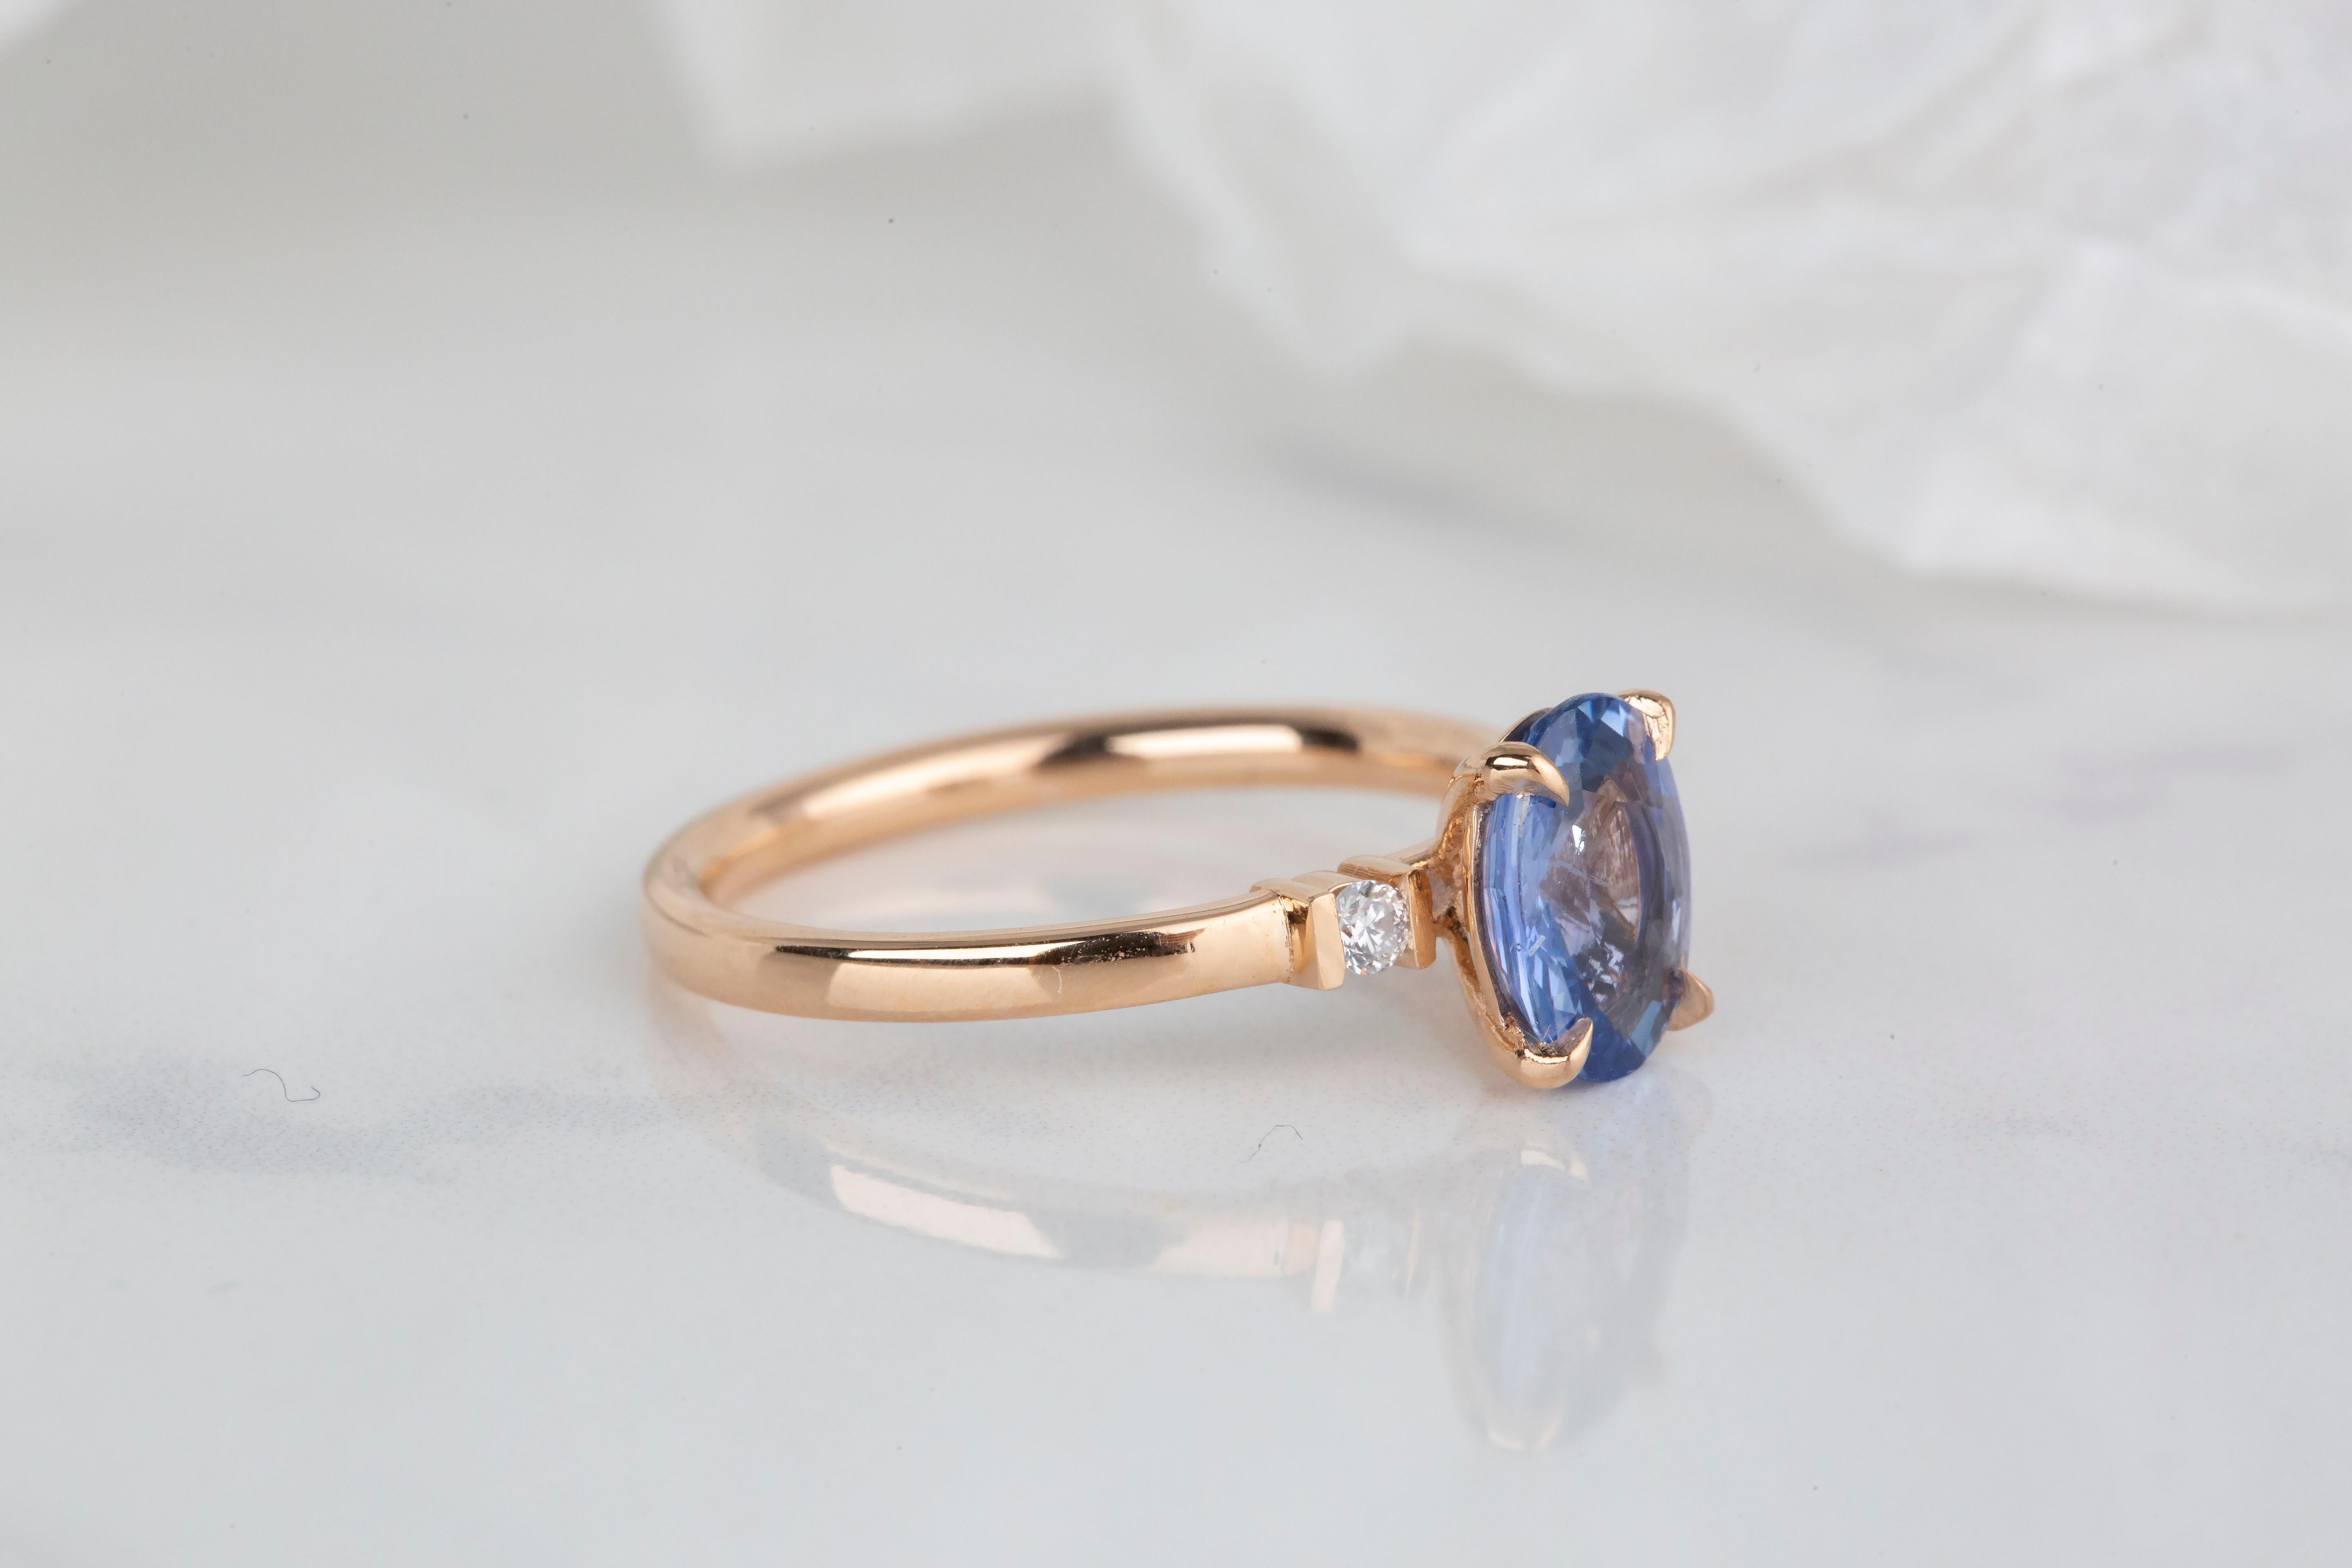 For Sale:  14k Rose Gold 1.37 Ct. Oval Sapphire and Diamond Ring 7